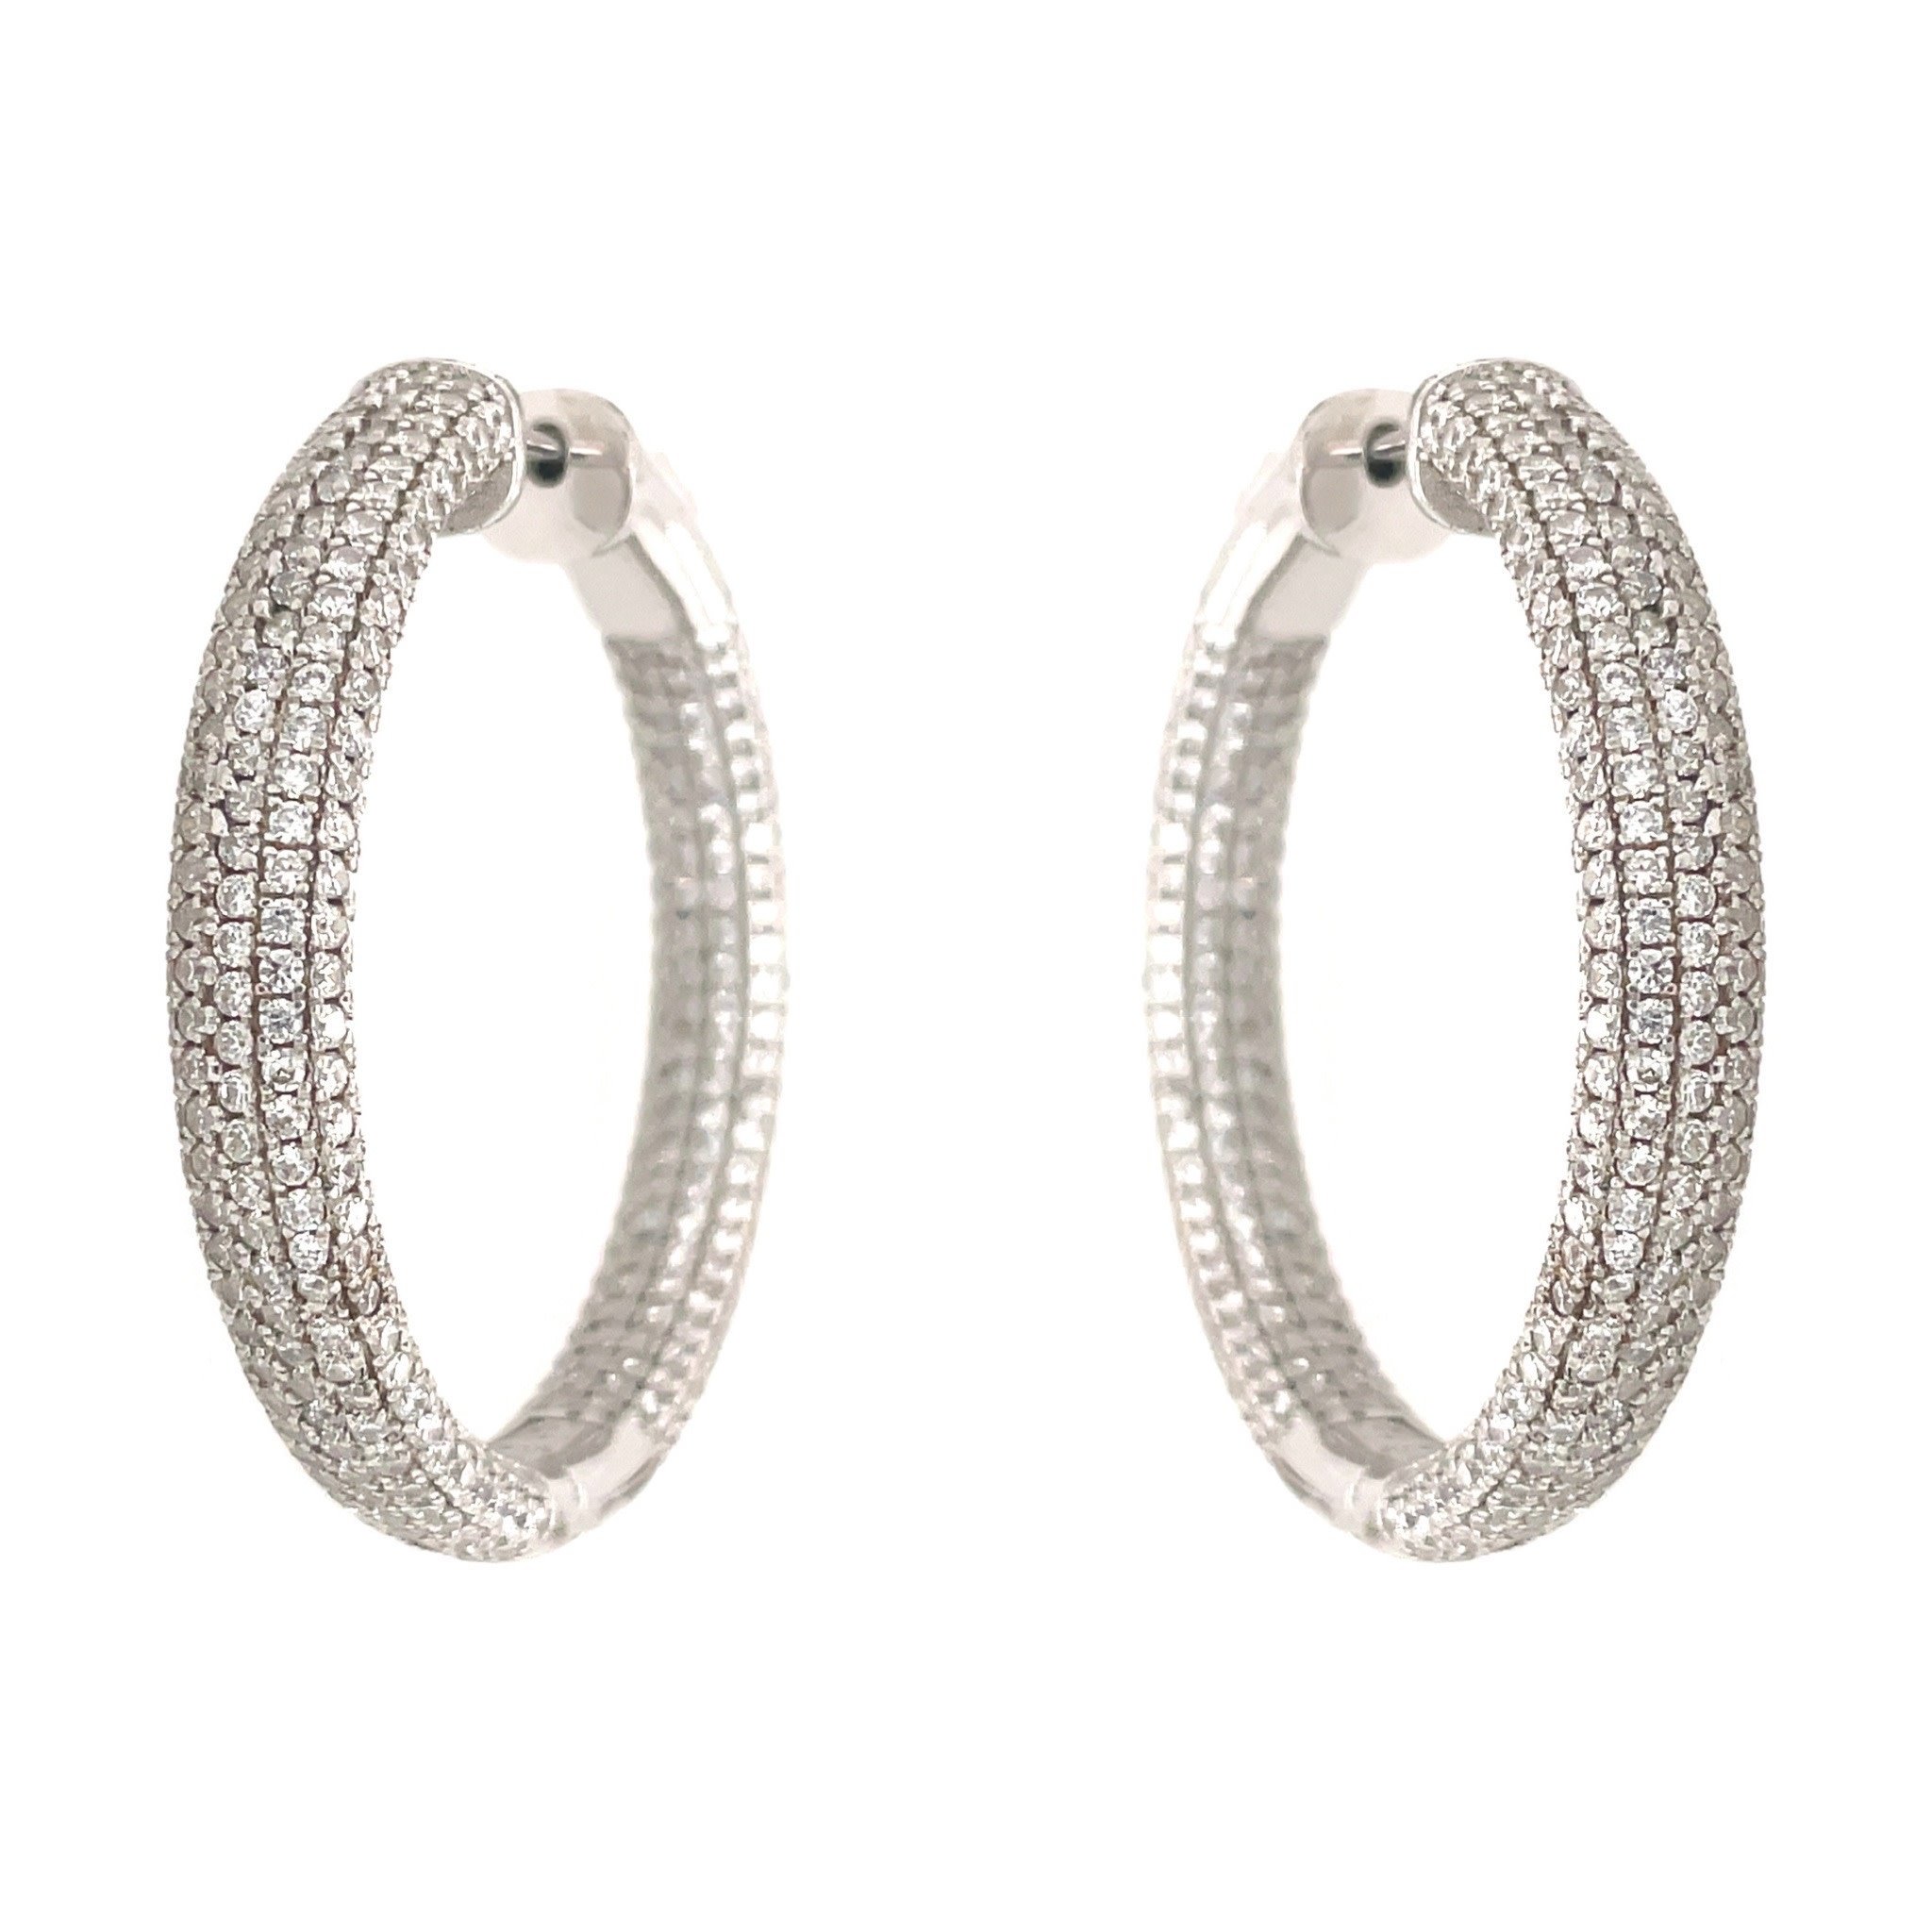 80039 STERLING SILVER 1.5" 5.4MM PAVE CUBIC ZIRCONIA HOOPS